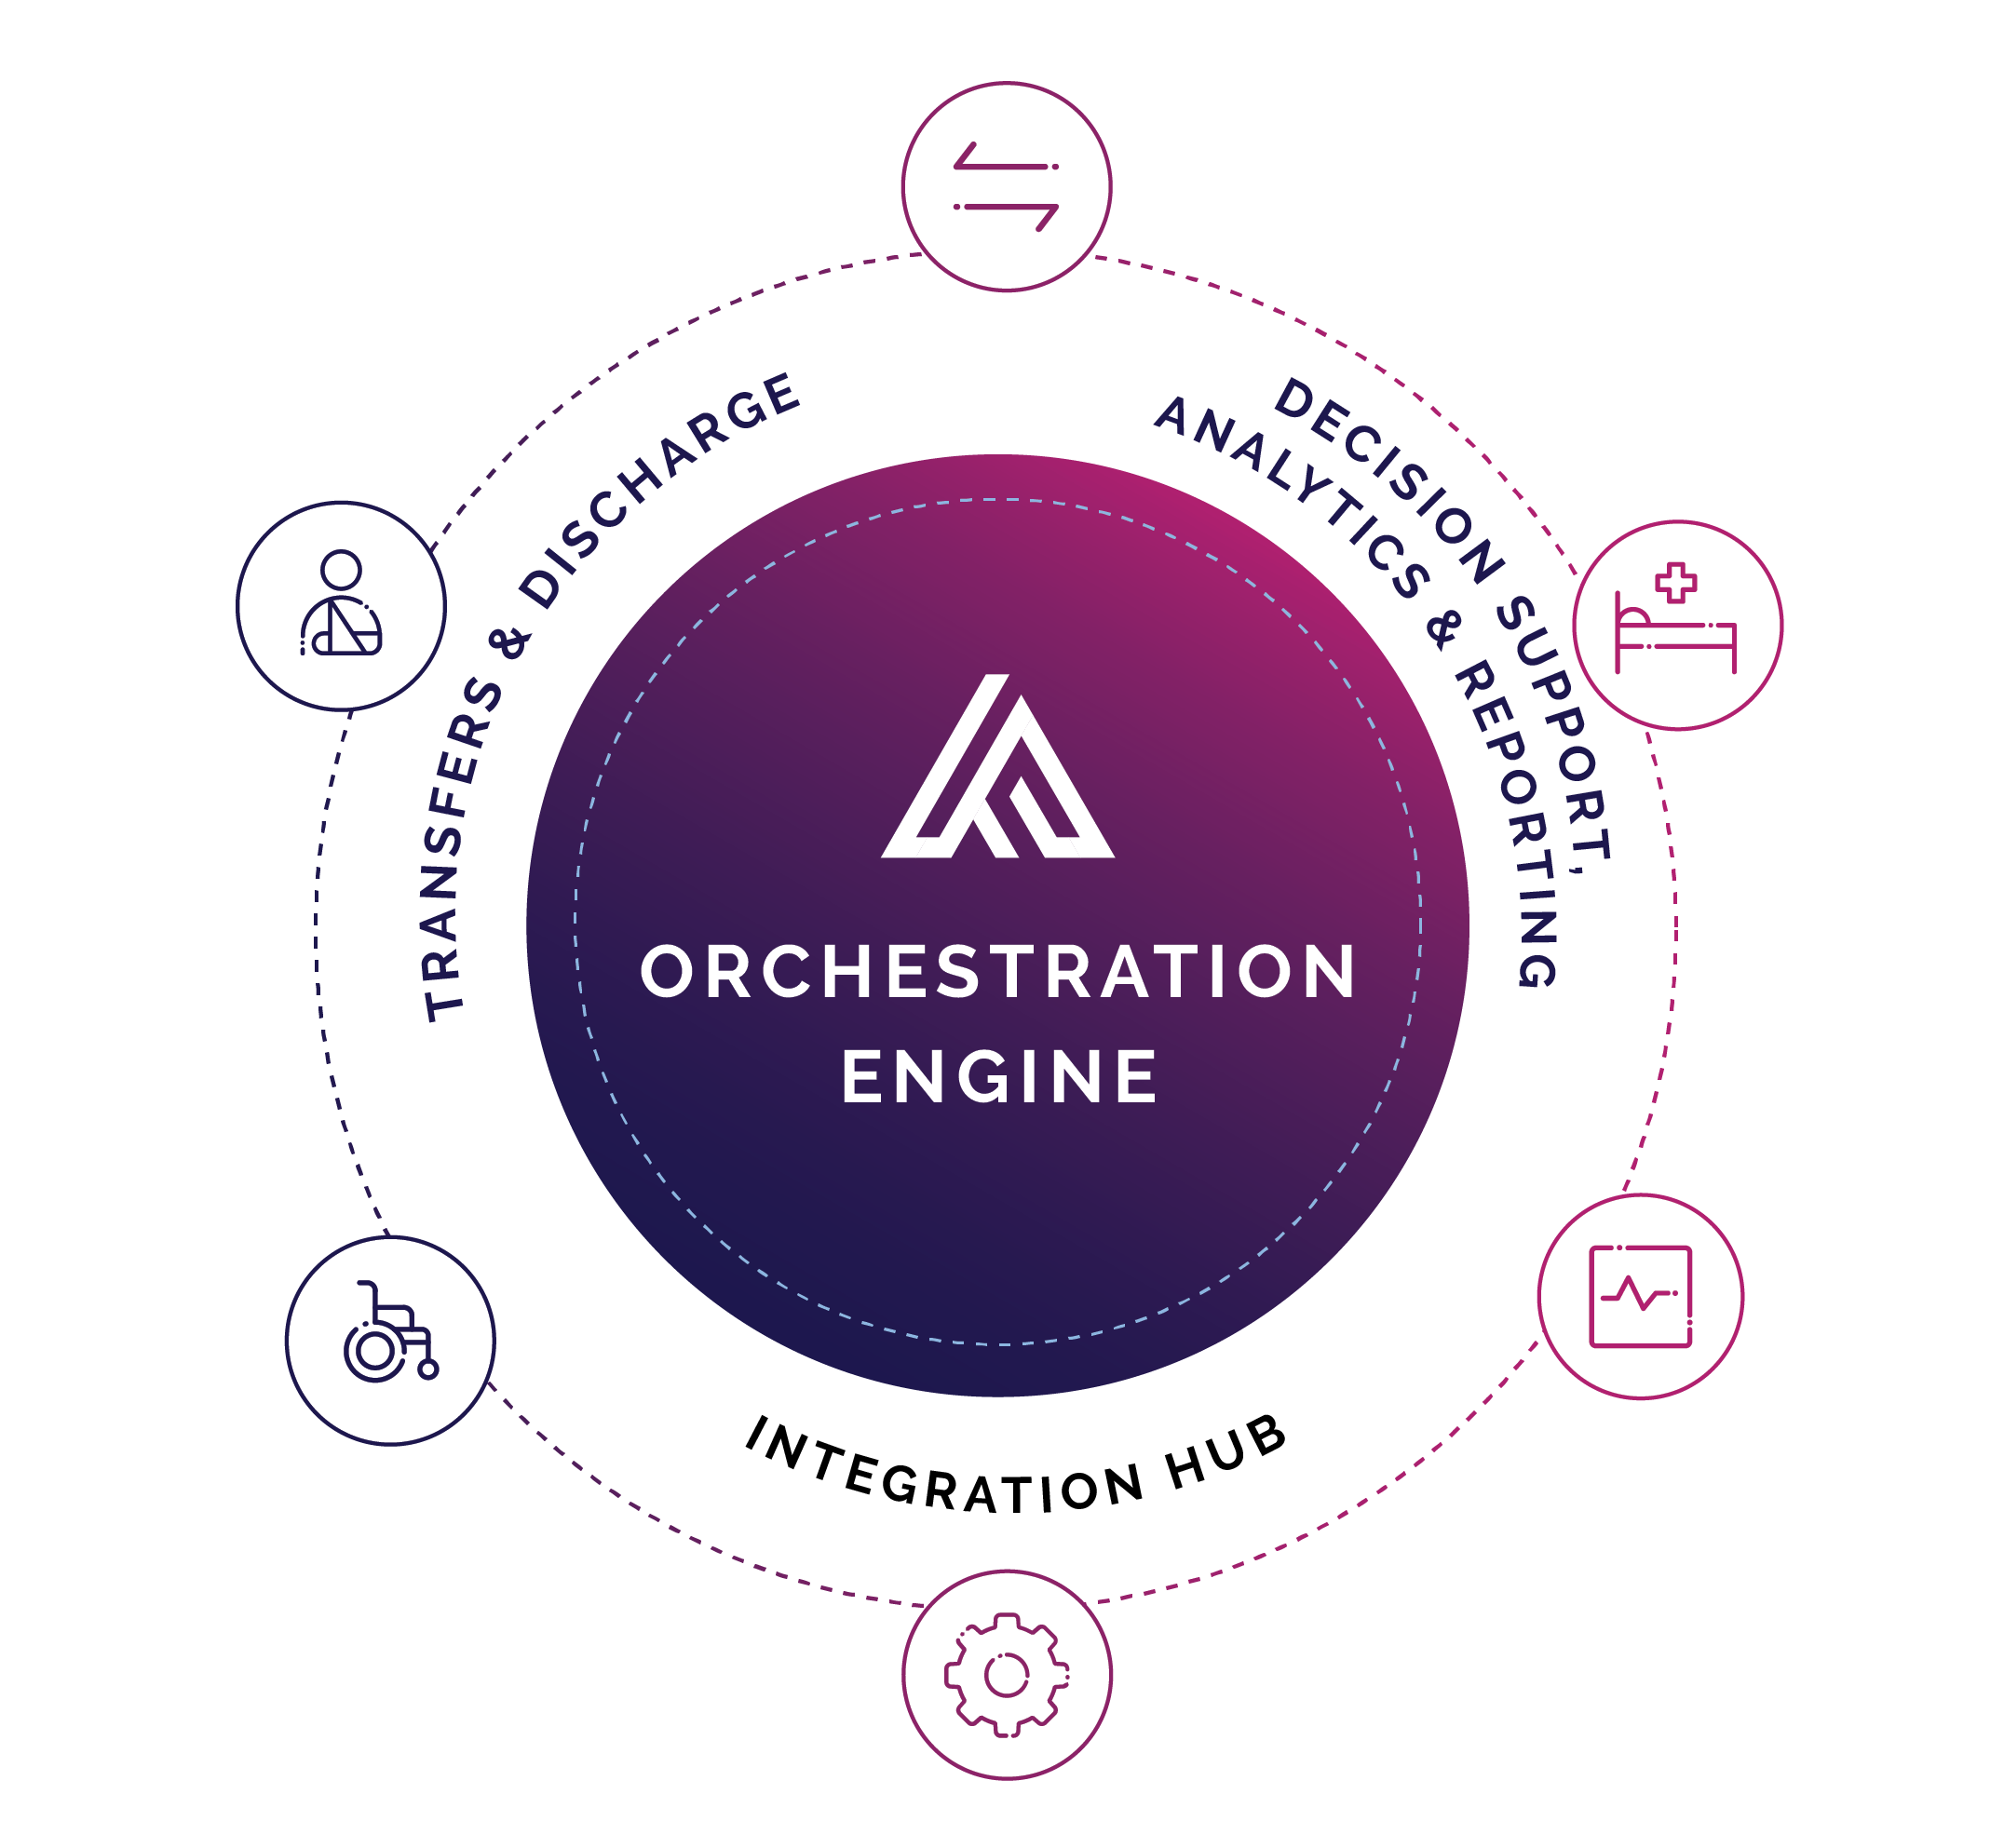 ABOUT Orchestration Engine